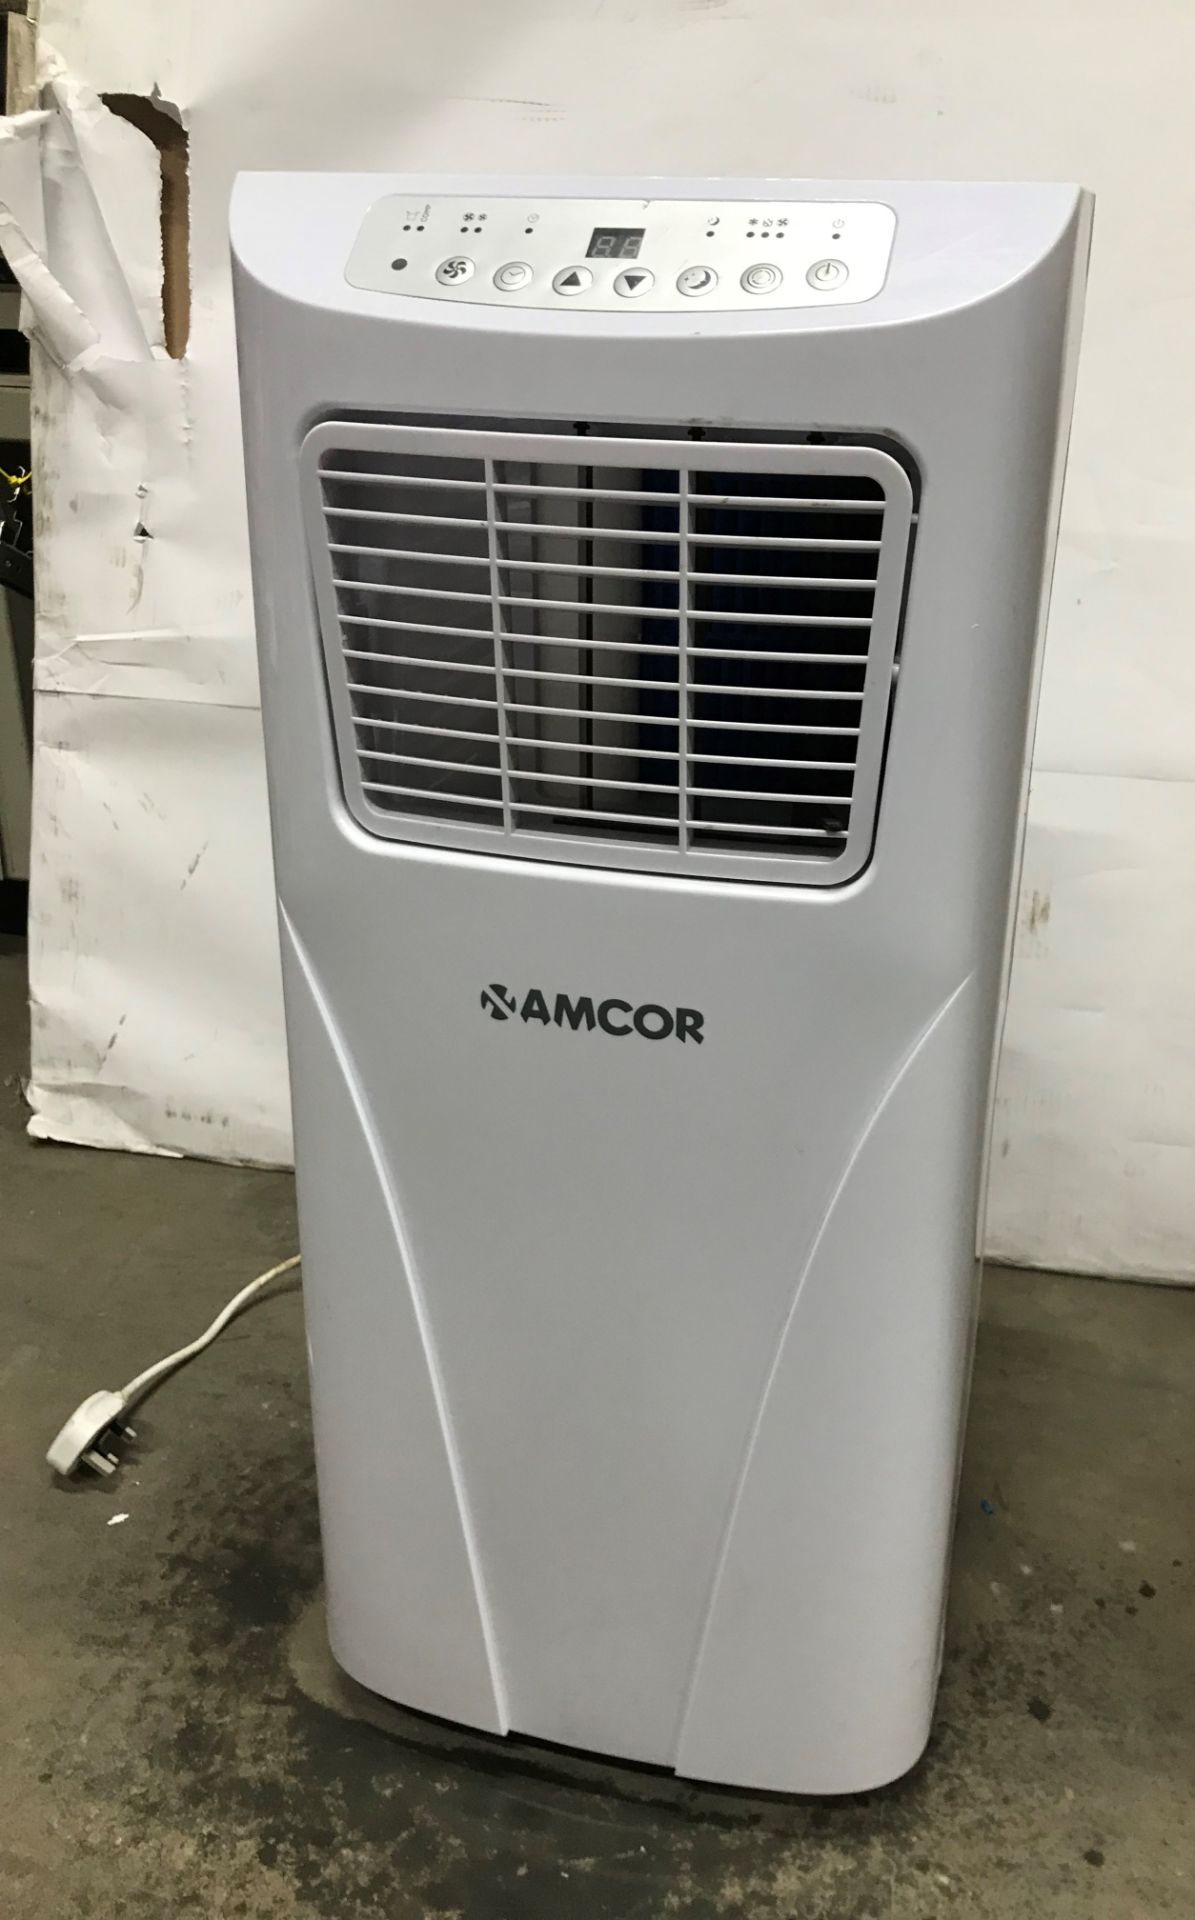 3 x Amcor SF10000E Portable Air Conditioning Units - Image 3 of 7